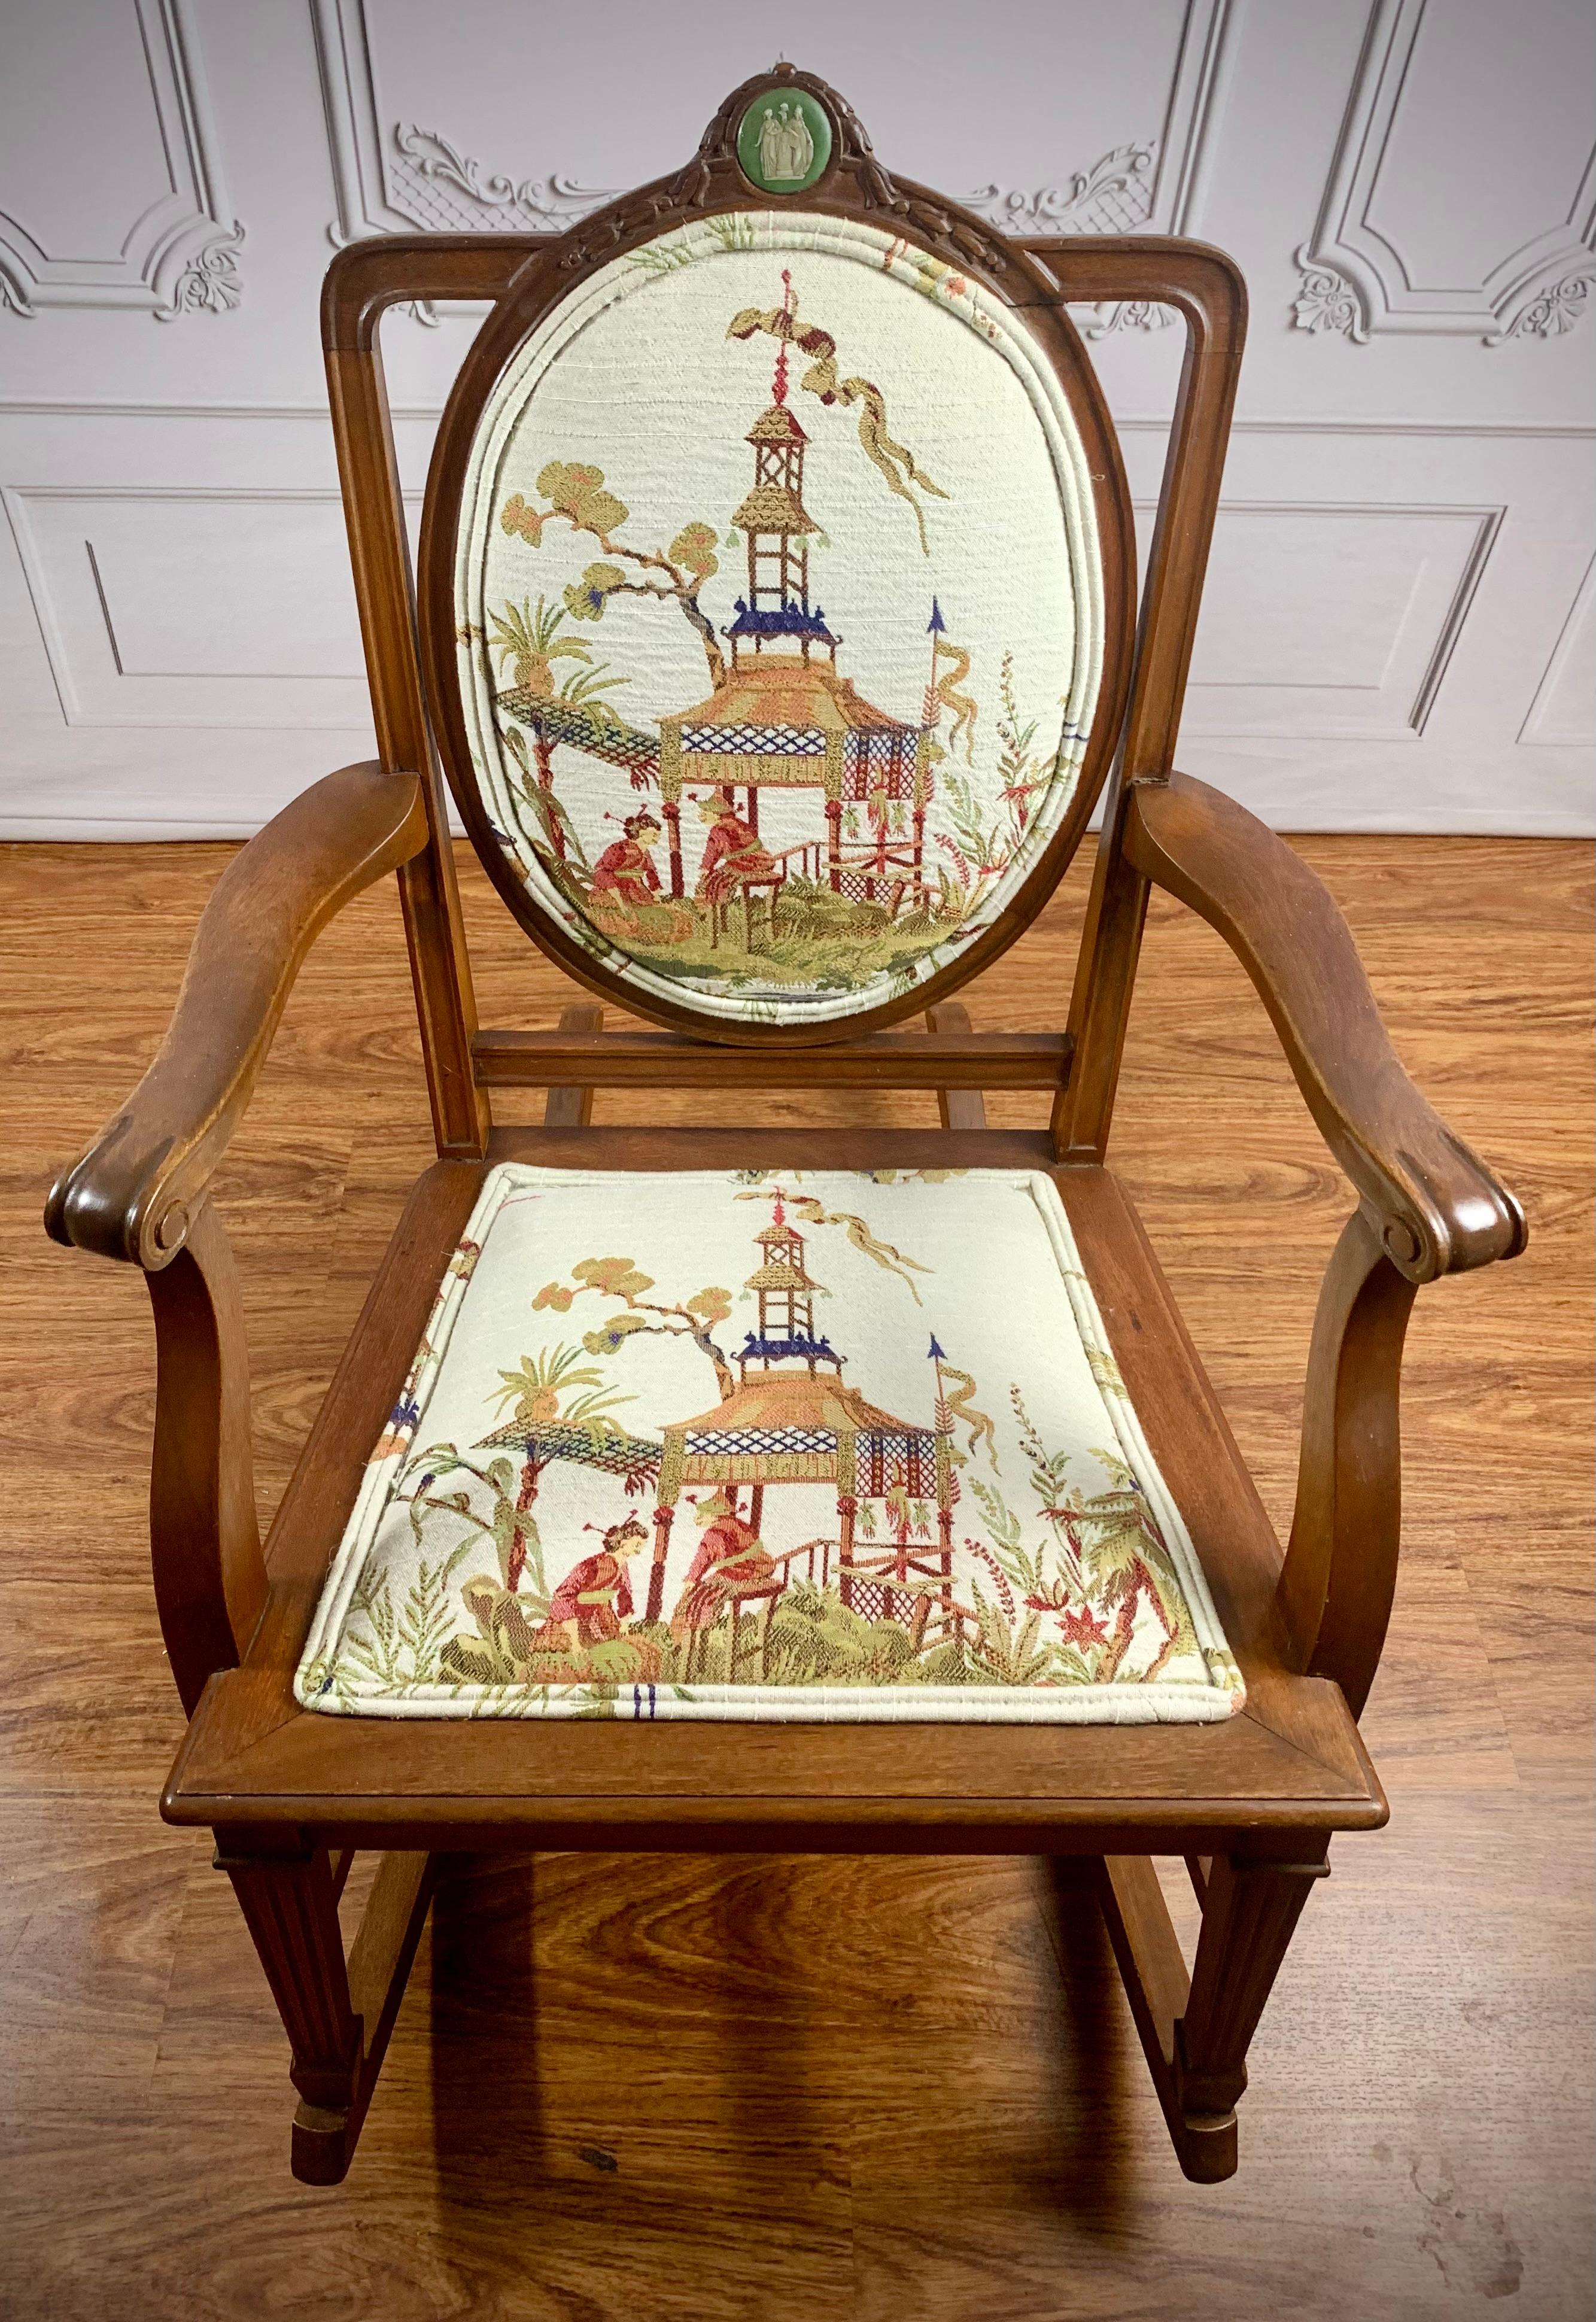 Regency Antique English Chinoiserie Upholstered Rocking Chair w/ Wedgwood Medallion For Sale